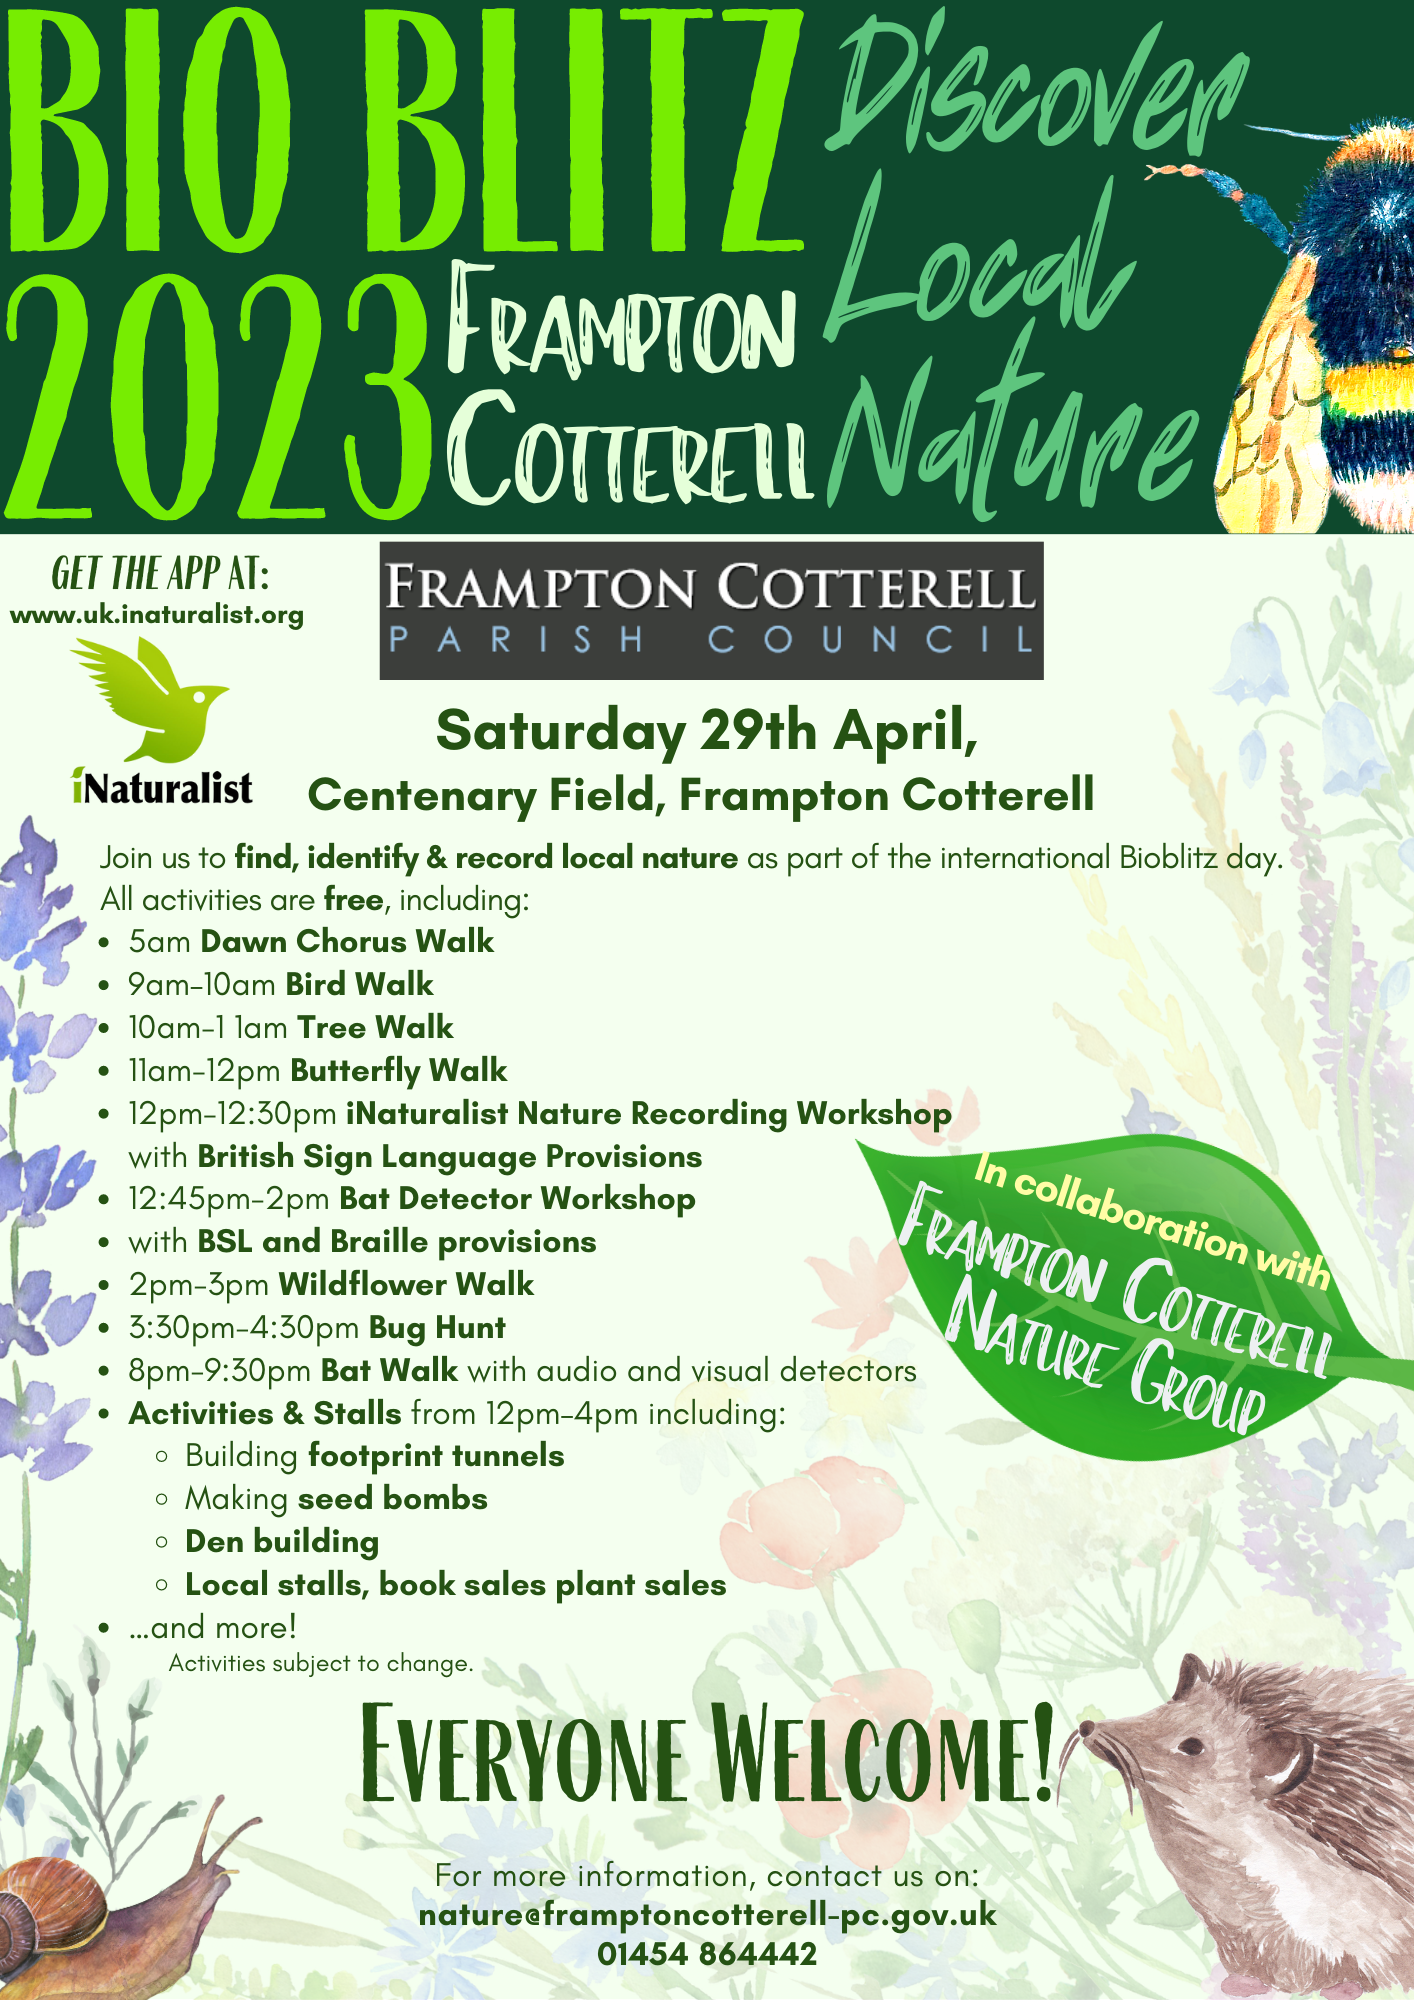 BIO BLITZ 2023 Frampton Cotterell. Discover Local Nature. Saturday 29th April, Centenary Field, Frampton Cotterell. Join us to find, identify & record local nature as part of the international Bioblitz day. All activities are free, including: 
5am Dawn Chorus Walk; 
9am–10am Bird Walk;
10am-1 1am Tree Walk;
11am-12pm Butterfly Walk;
12pm-12:30pm iNaturalist Nature Recording Workshop with British Sign Language Provisions;
12:45pm-2pm Bat Detector Workshop 
with BSL and Braille provisions;
2pm-3pm Wildflower Walk;
3:30pm-4:30pm Bug Hunt;
8pm-9:30pm Bat Walk with audio and visual detectors;
Activities & Stalls from 12pm–4pm including: 
Building footprint tunnels;
Making seed bombs;
Den building;
Local stalls, book sales plant sales, 
…and more! 
Activities subject to change.
Everyone Welcome!
For more information, contact us on: nature@framptoncotterell-pc.gov.uk - 01454 864442 /
In collaboration with Frampton Cotterell 
Nature Group.
get the app at: www.uk.inaturalist.org
